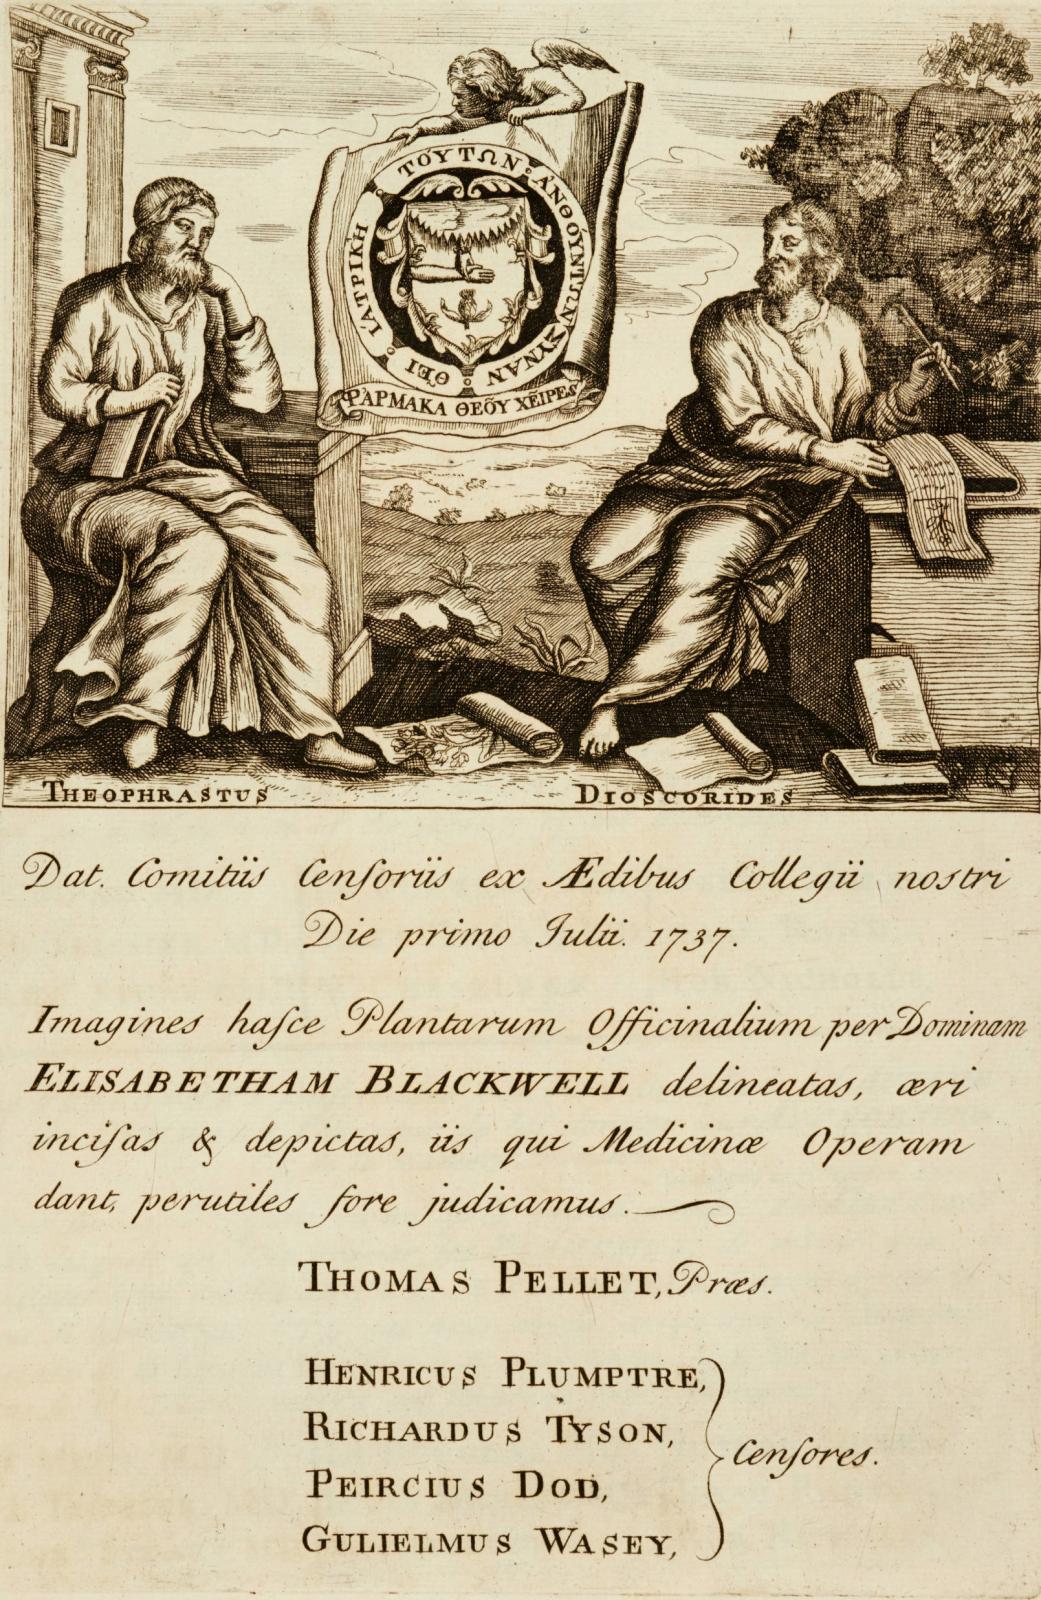 Printed page with an illustration of two people in loose robes looking at one another. Below one person is the text "THEOPHRASTUS" and below the other person is the text "DIOSCOREDES" under the illustration is text in Latin.